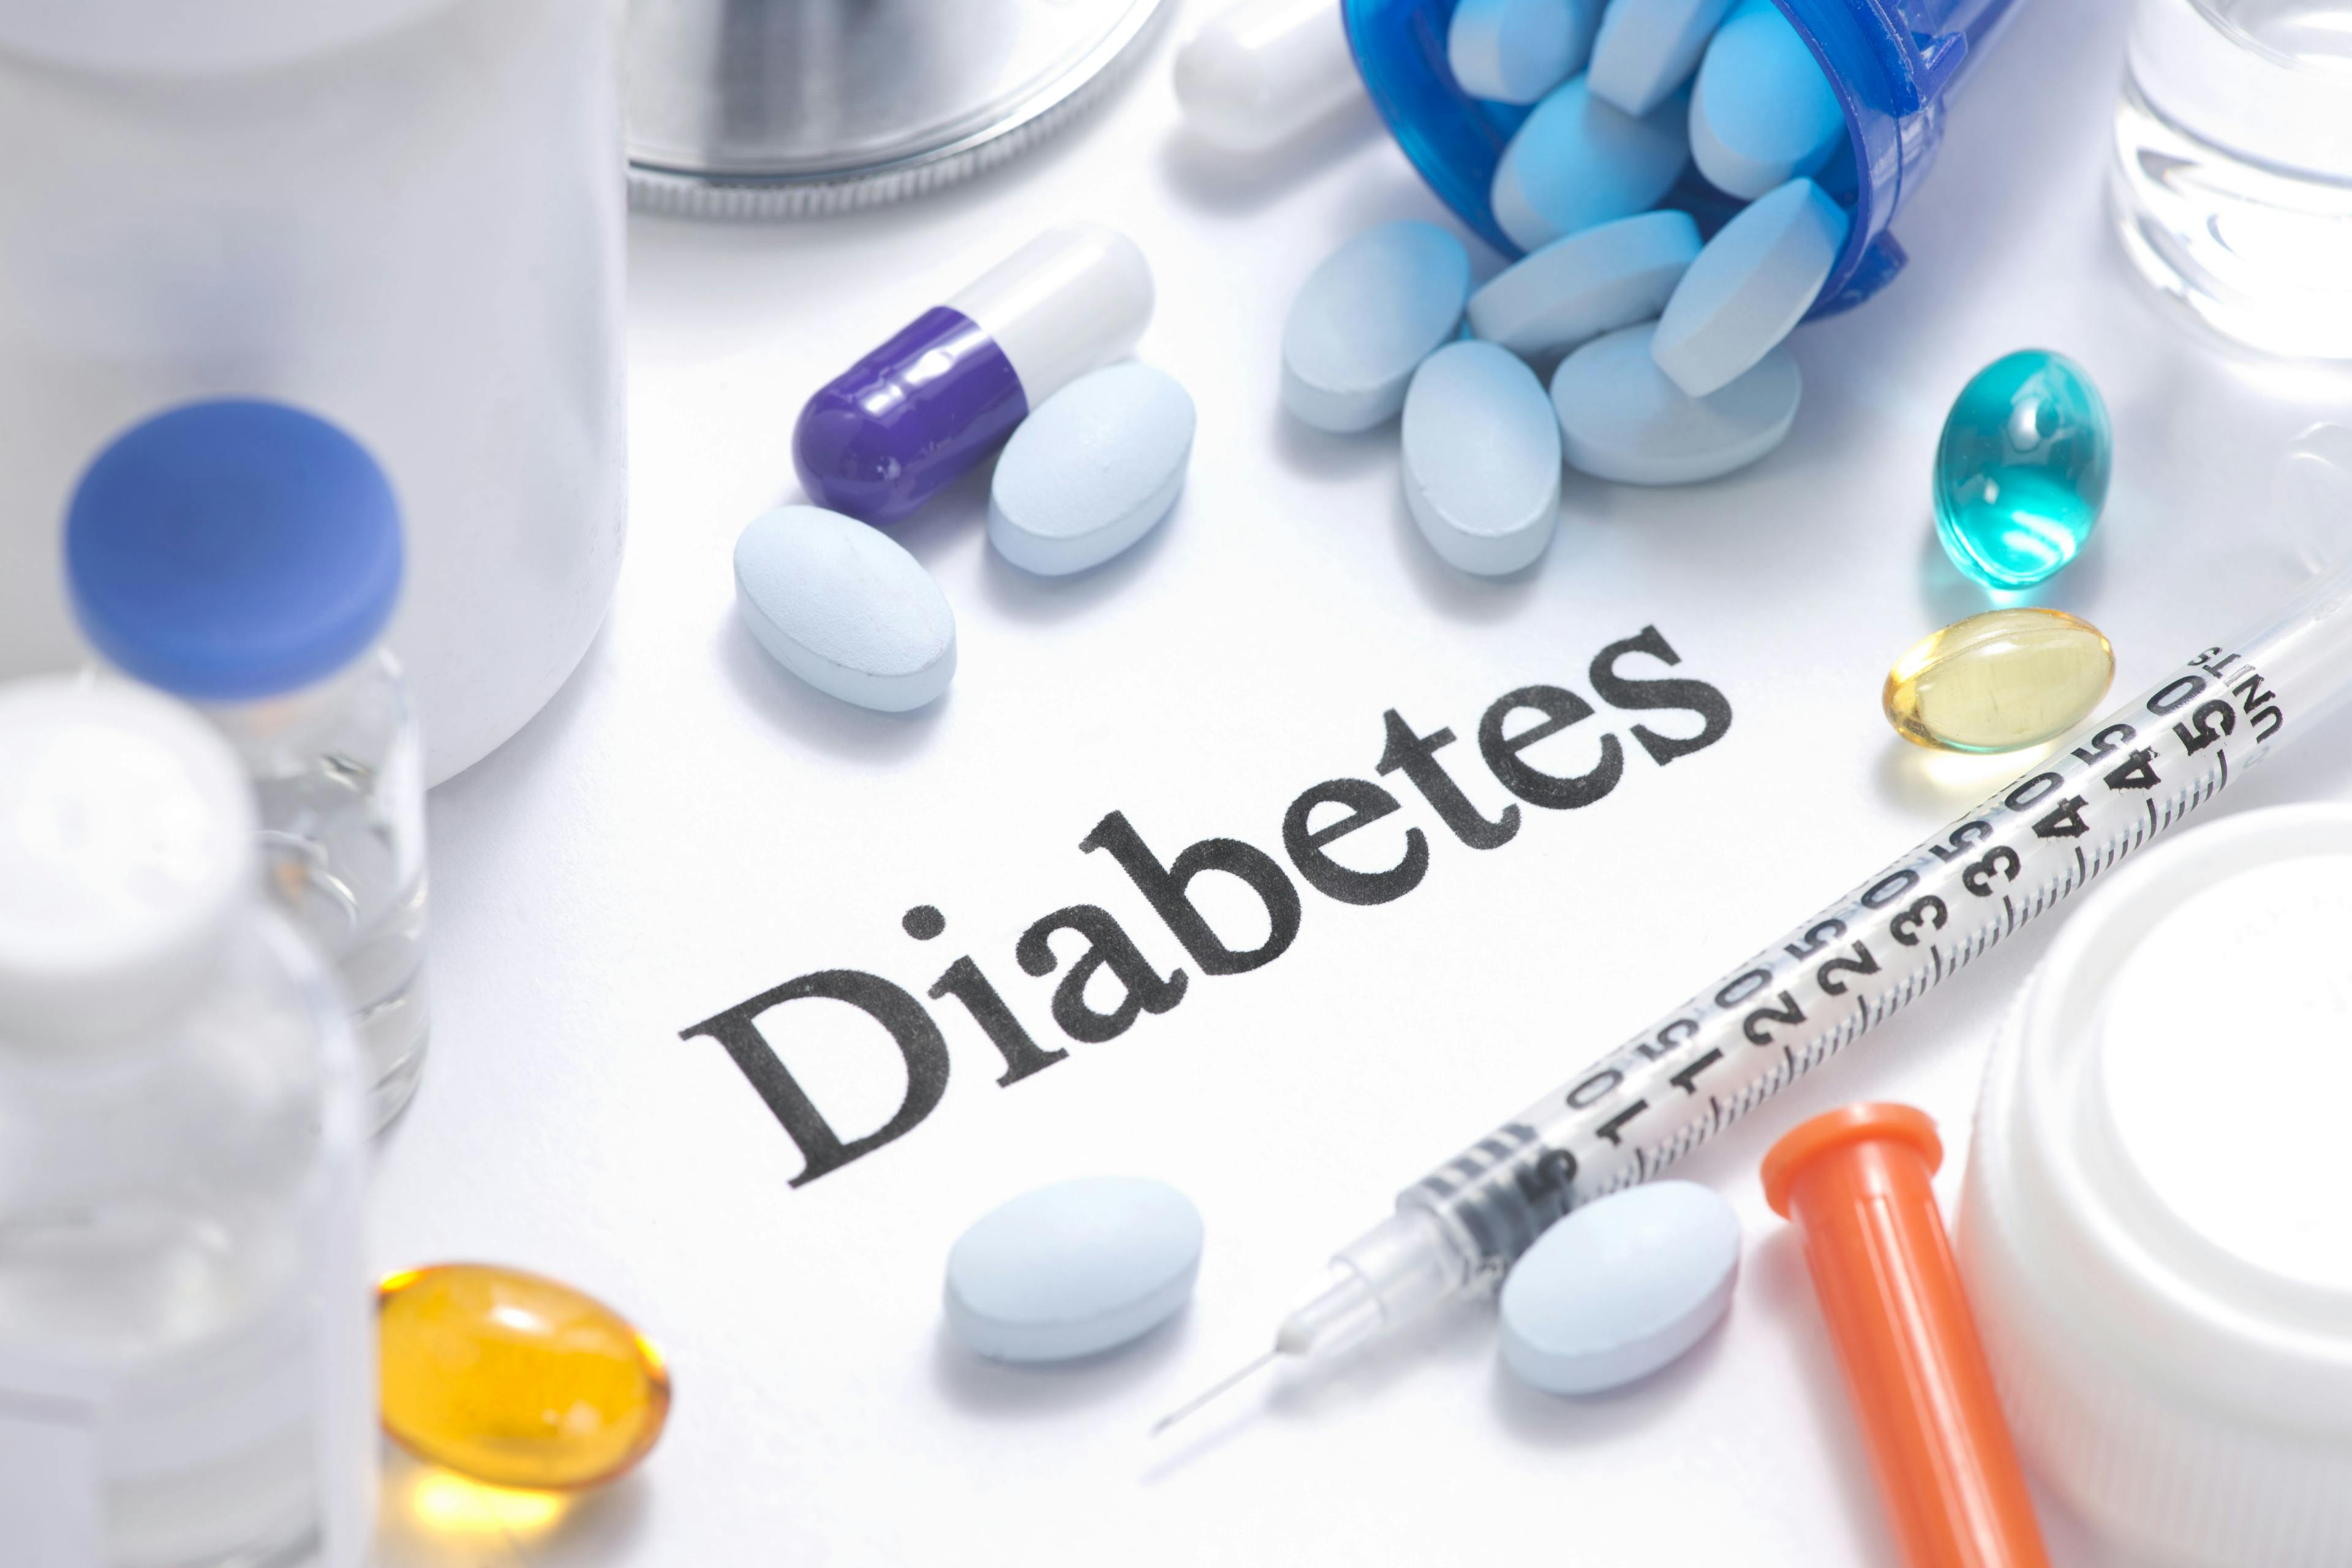 USPSTF Reaffirms 2014 Guidance on Screening for Gestational Diabetes